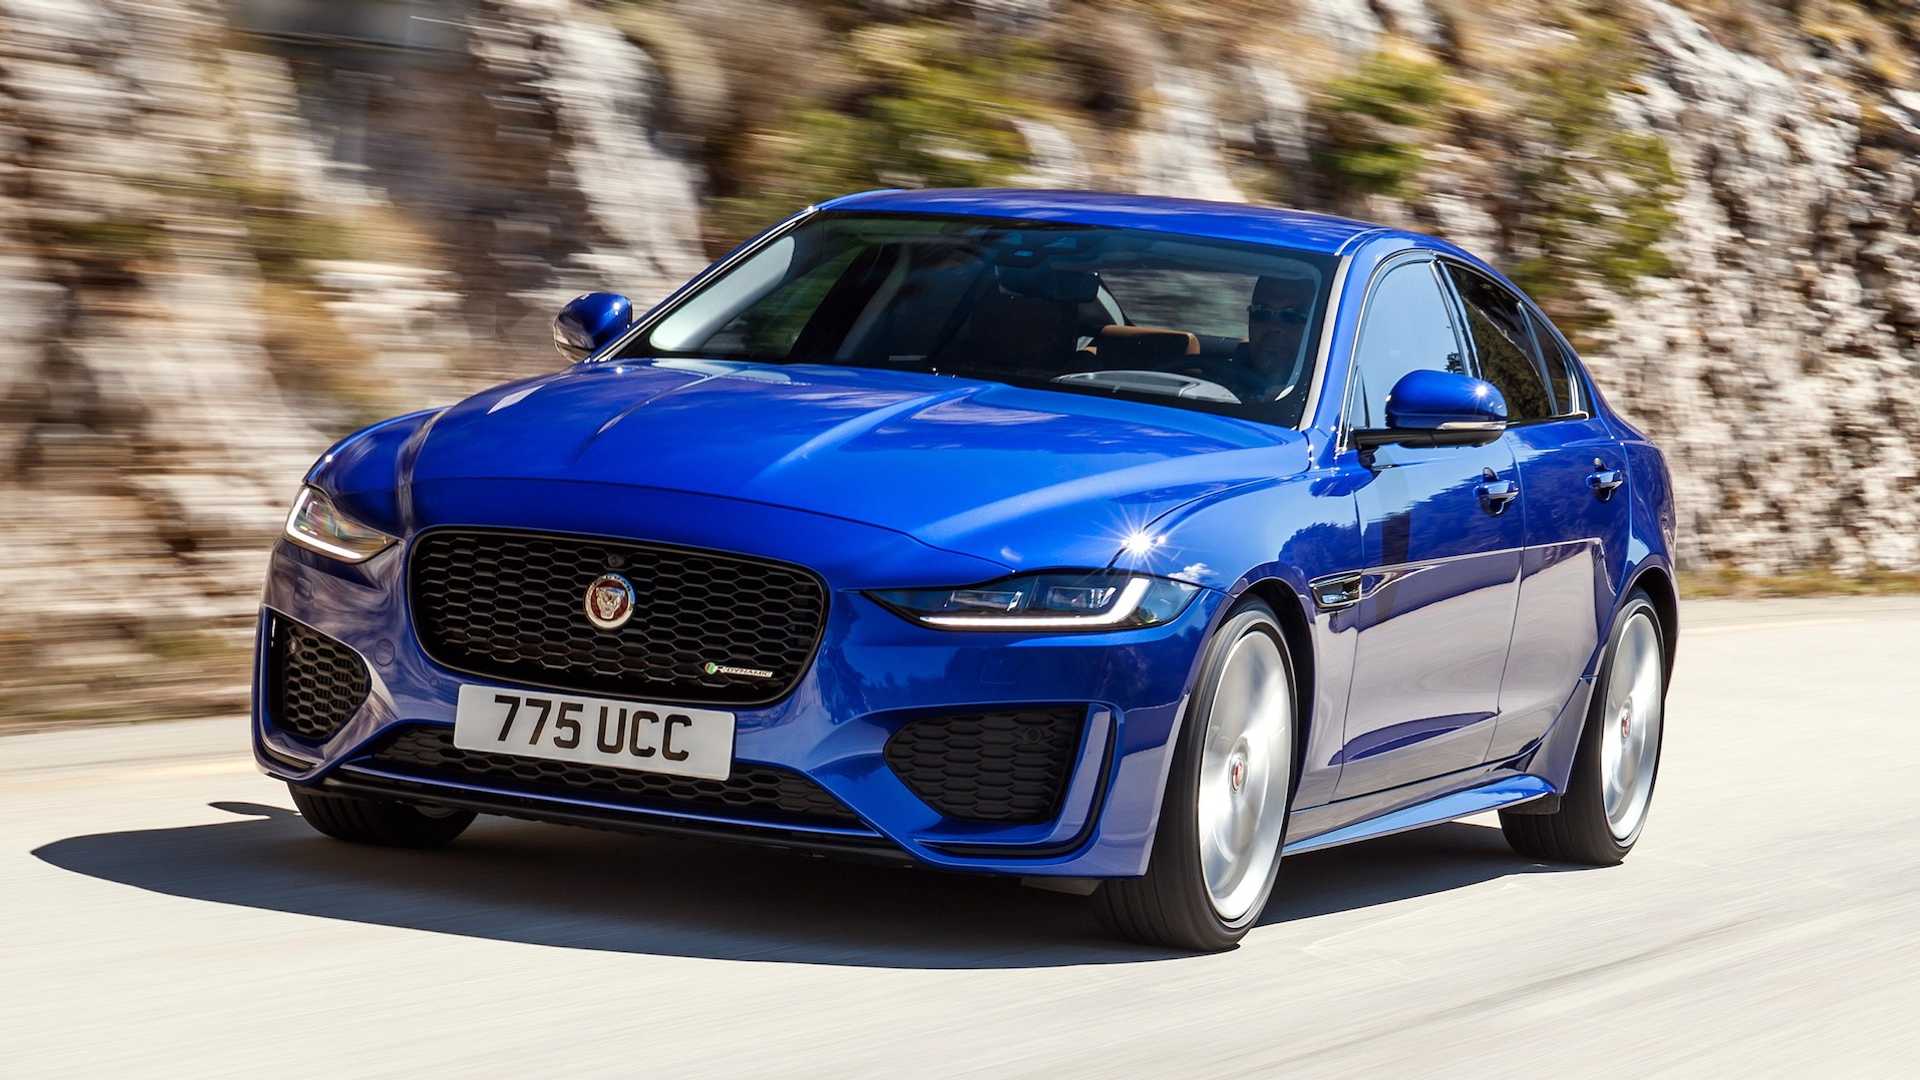 Jaguar XE First Drive: More Is More